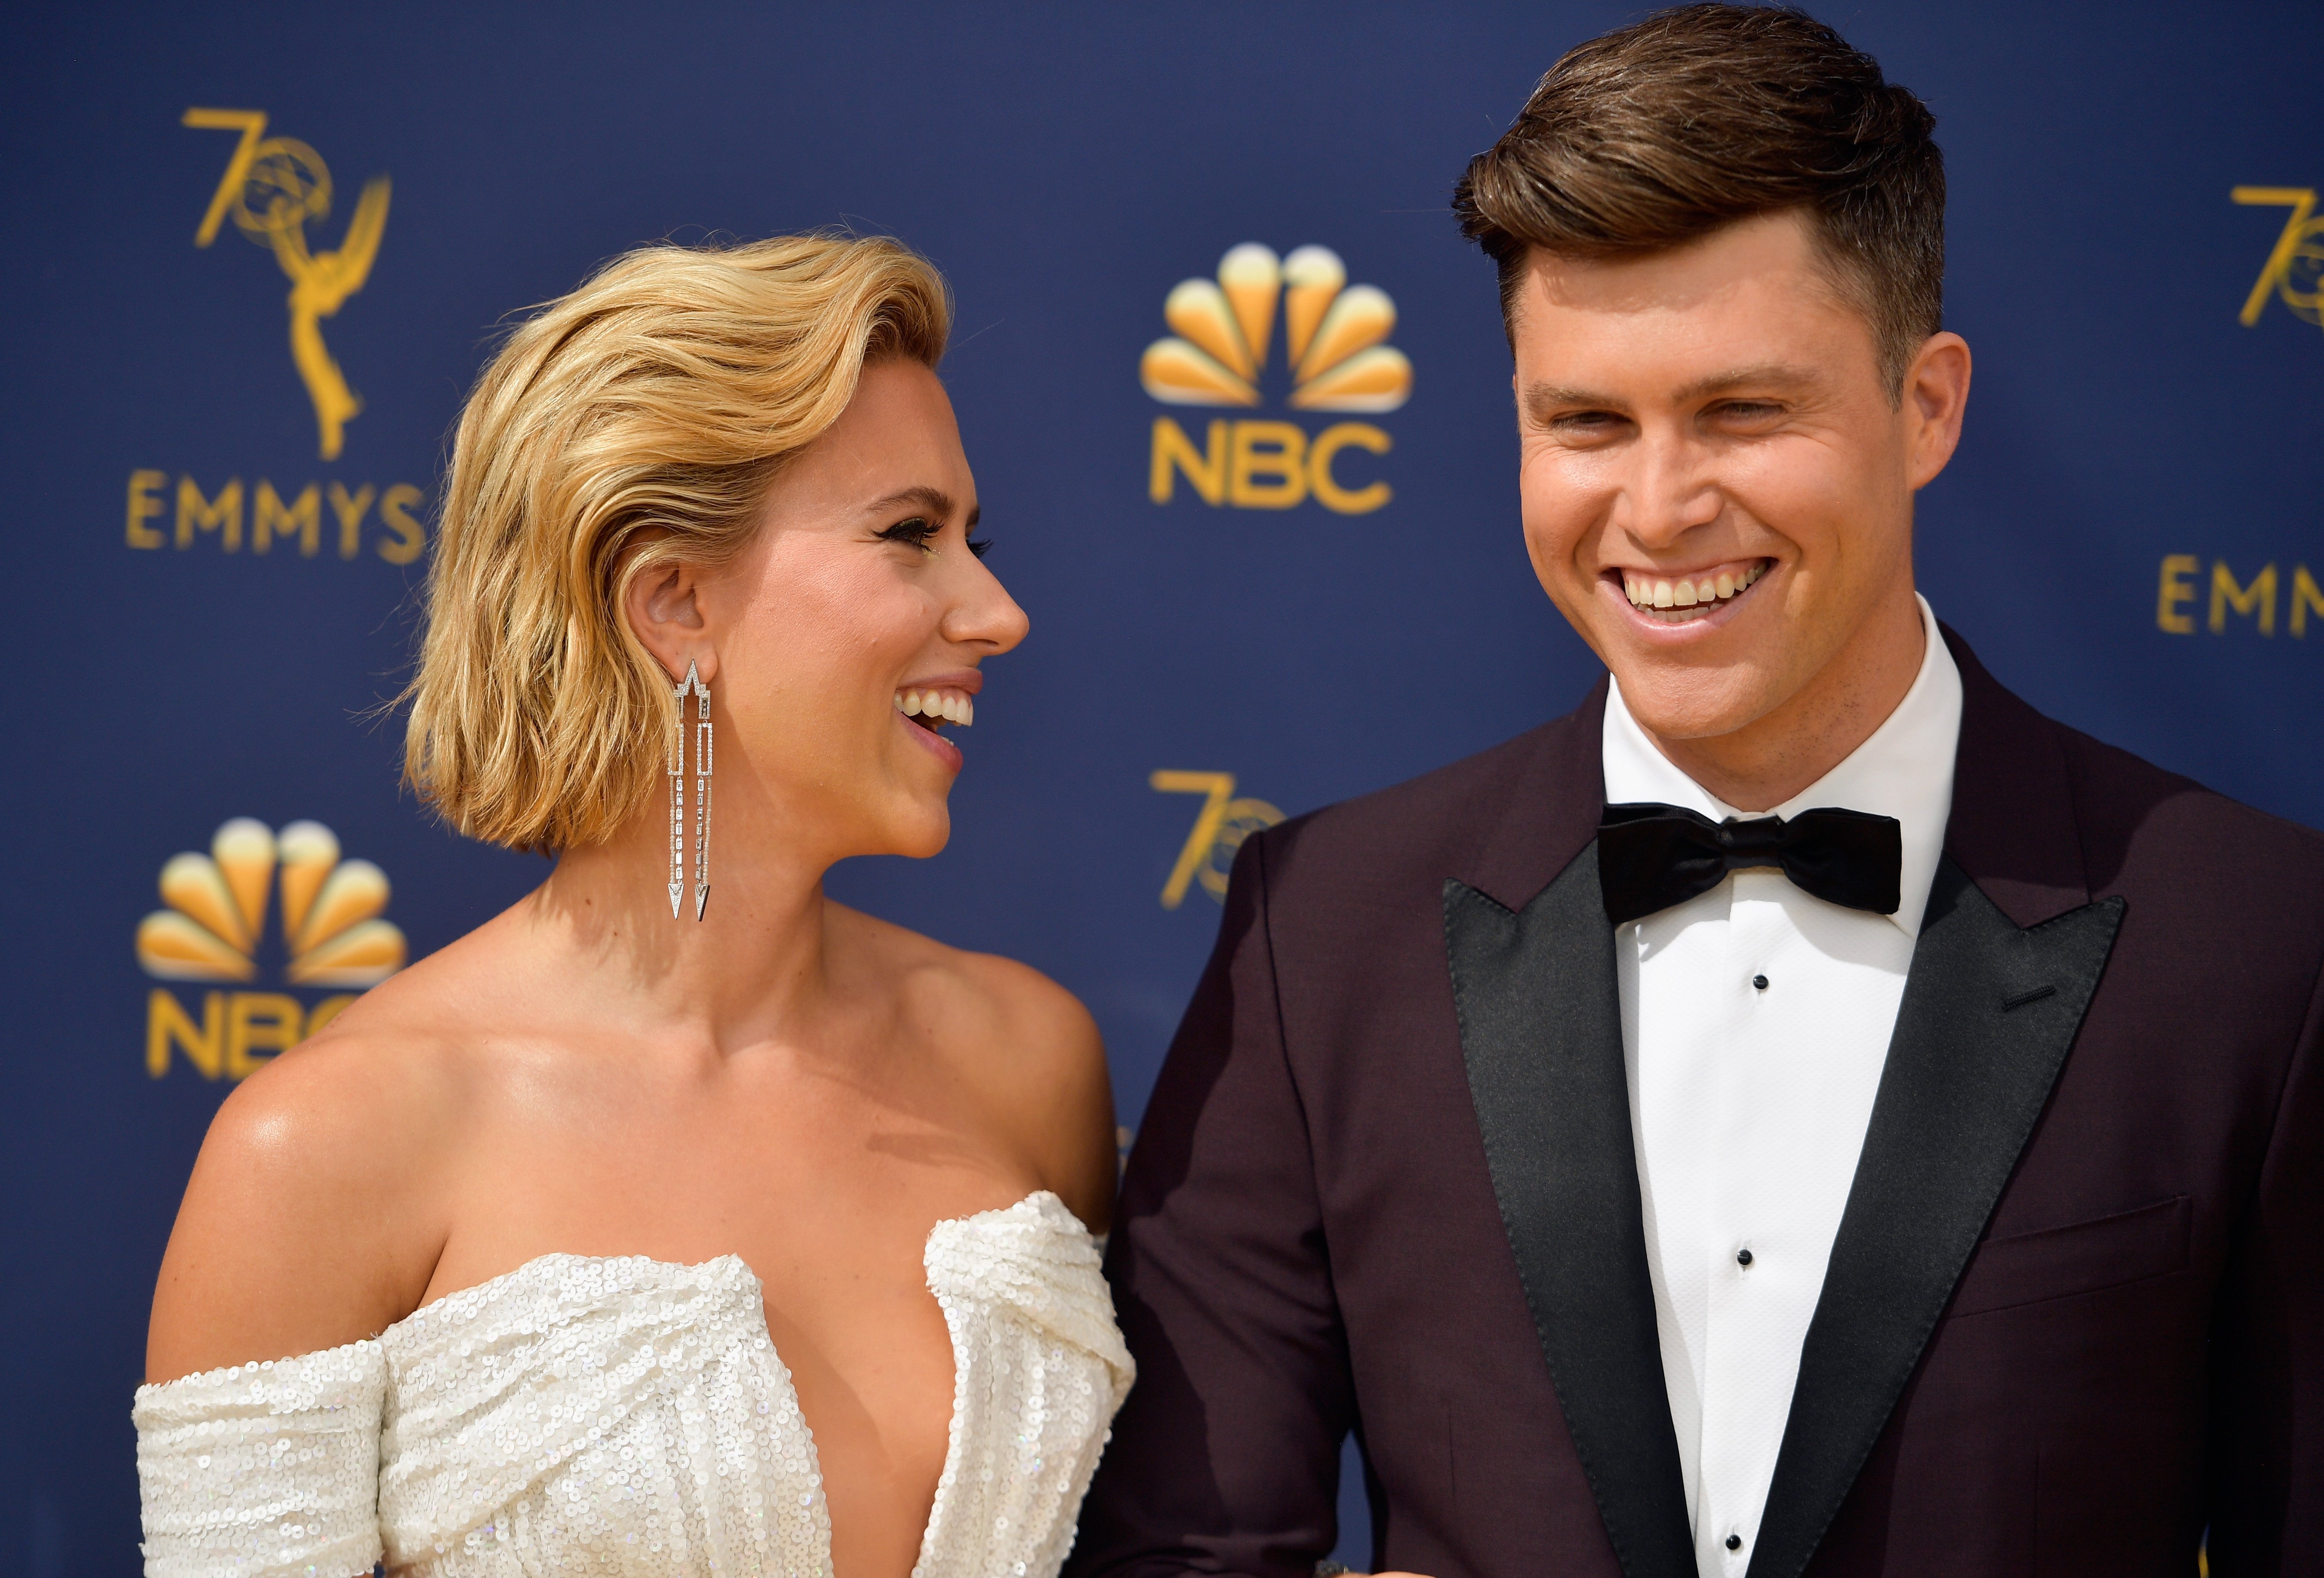 Scarlett Johansson and Colin Jost at the 70th Emmy Awards at Microsoft Theater on September 17, 2018 in Los Angeles, California | Photo: Getty Images